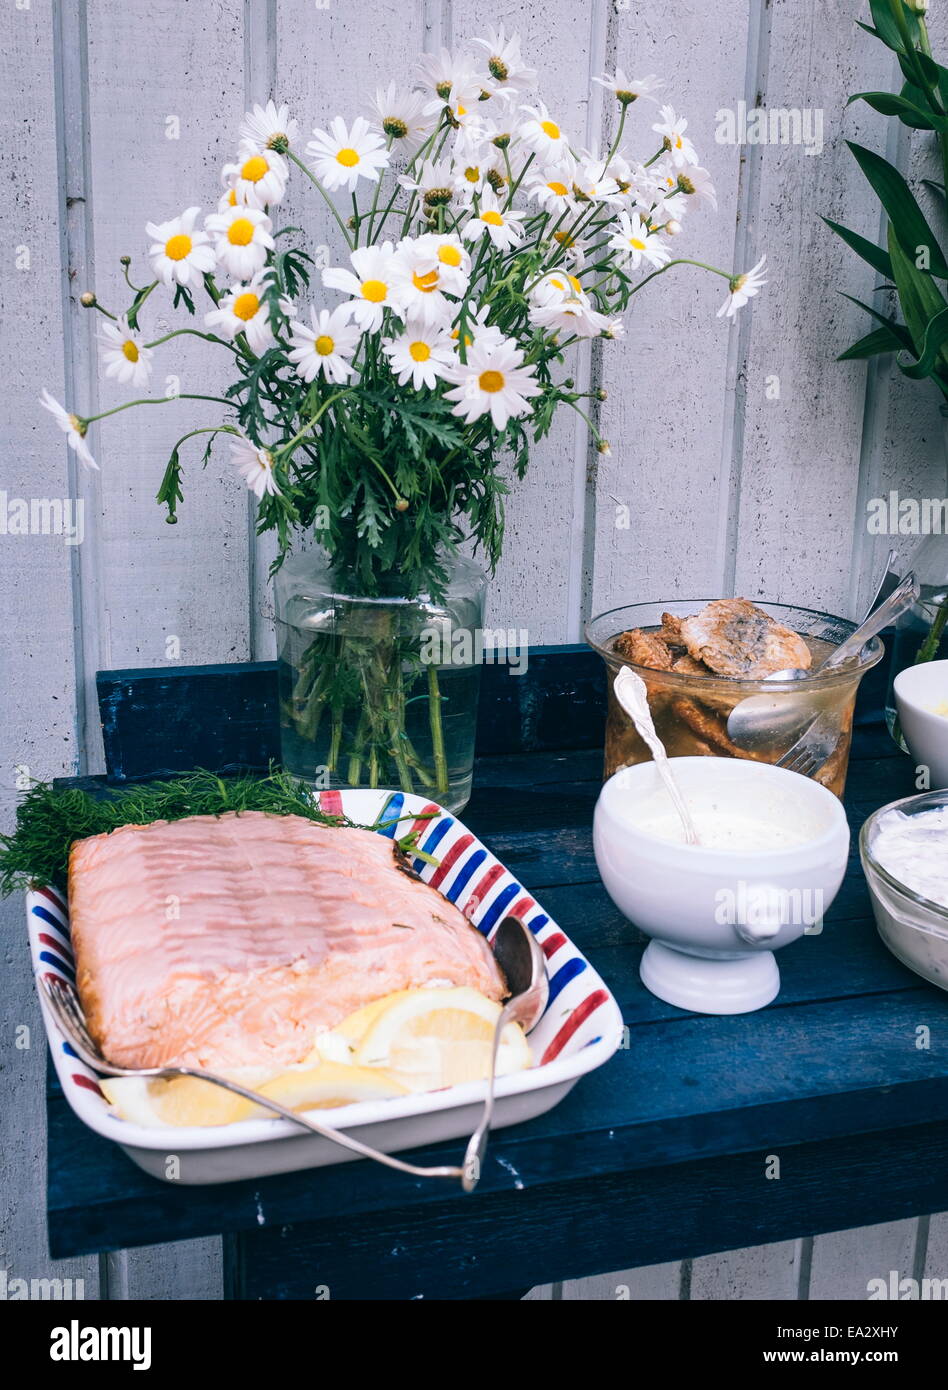 Tradtional Swedish foods, including salmon fillet with lemon and herring, Sweden, Scandinavia, Europe Stock Photo